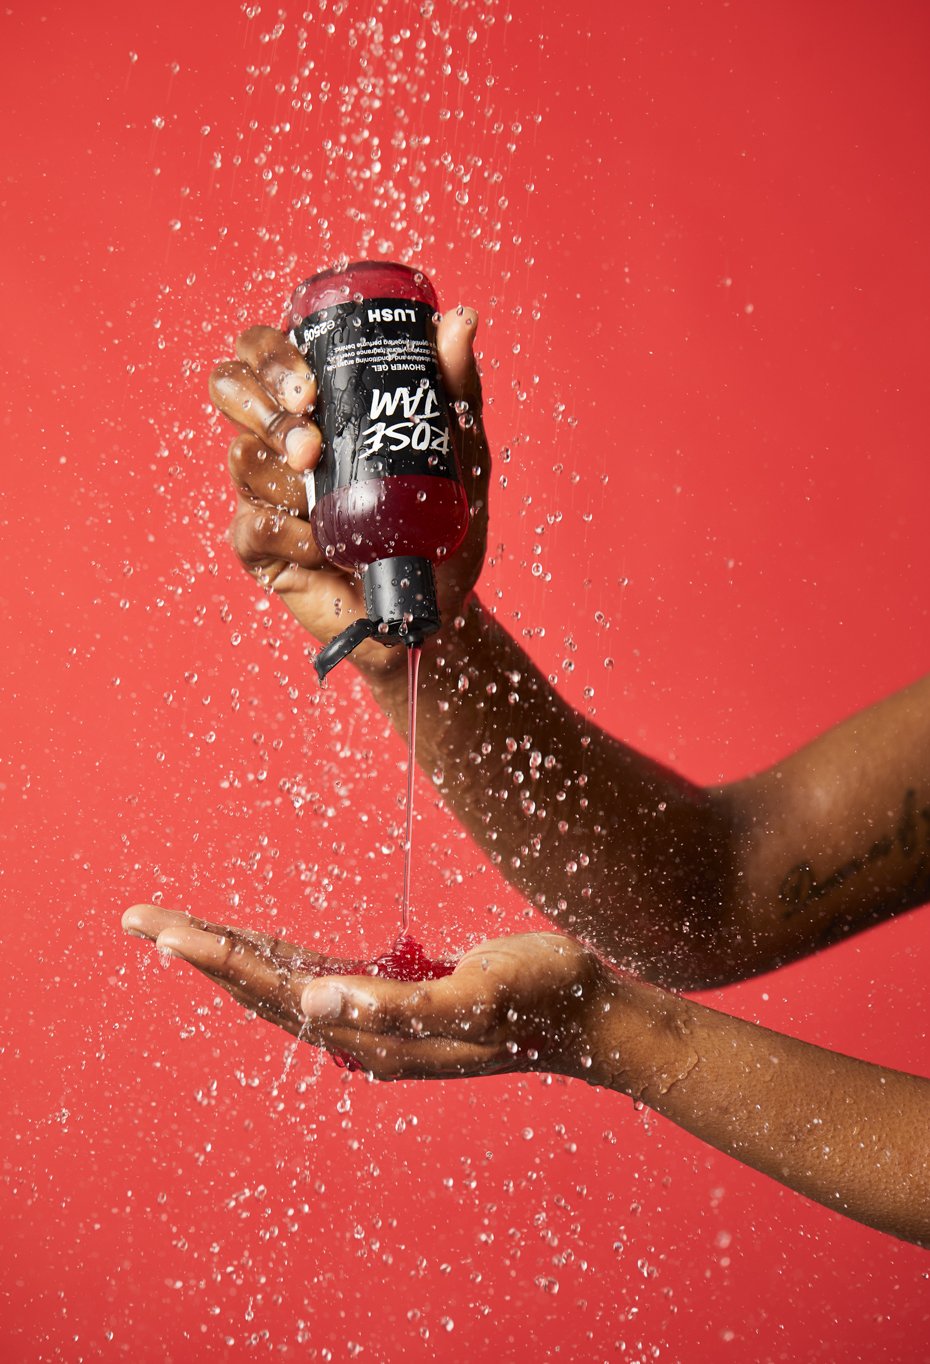 Rose Jam shower gel is being poured directly from bottle to hand, under running shower water on a deep red background.